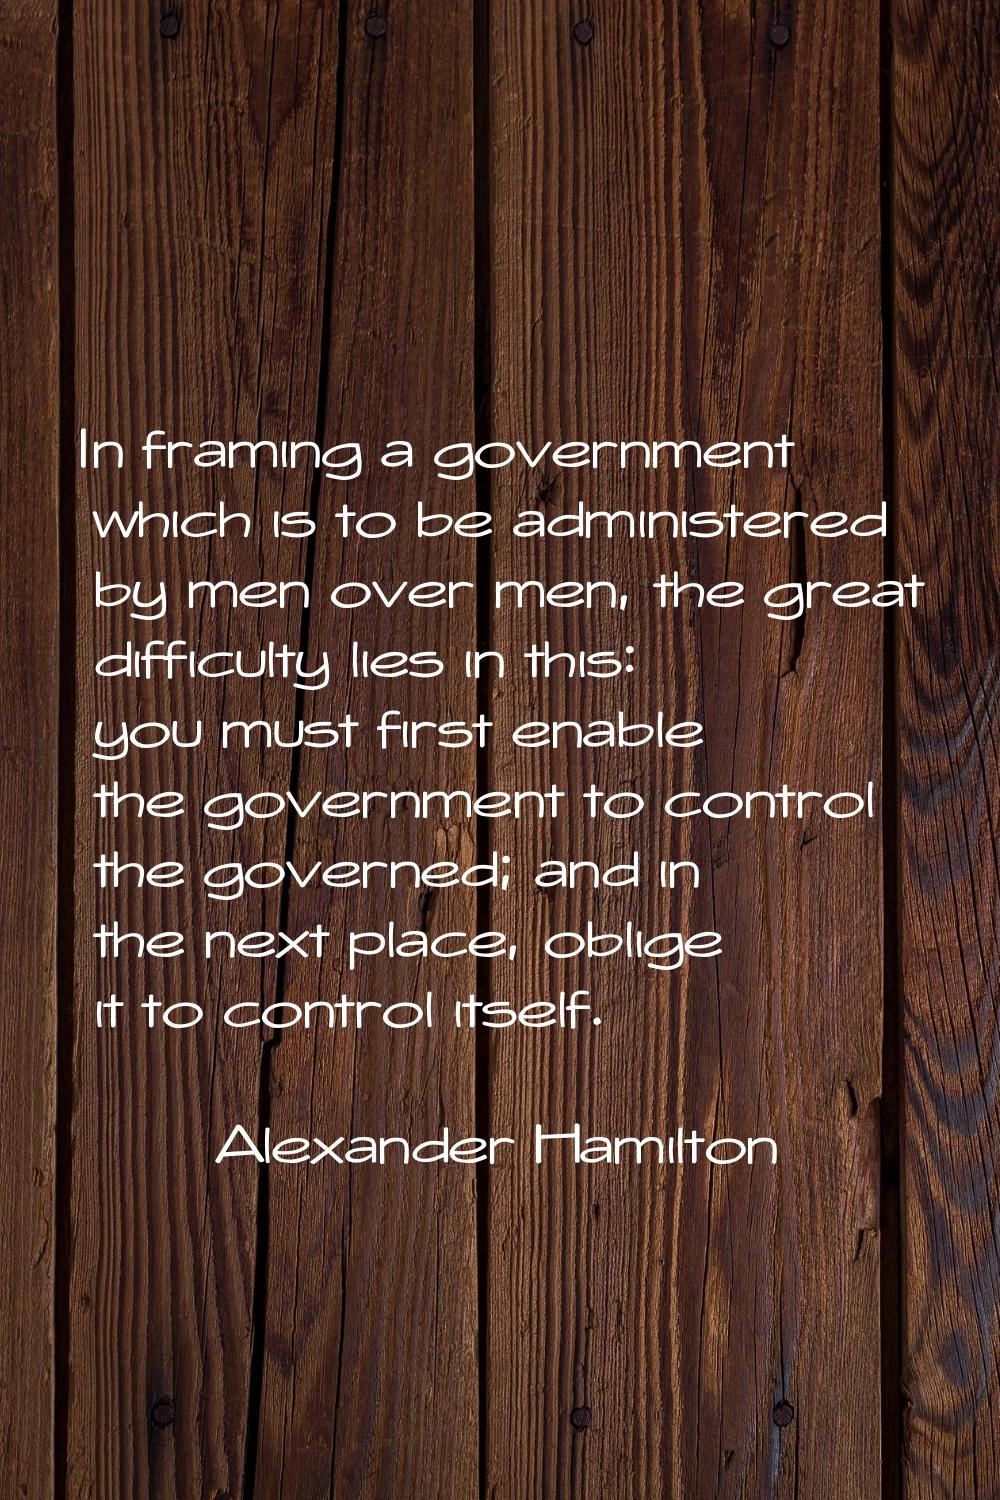 In framing a government which is to be administered by men over men, the great difficulty lies in t